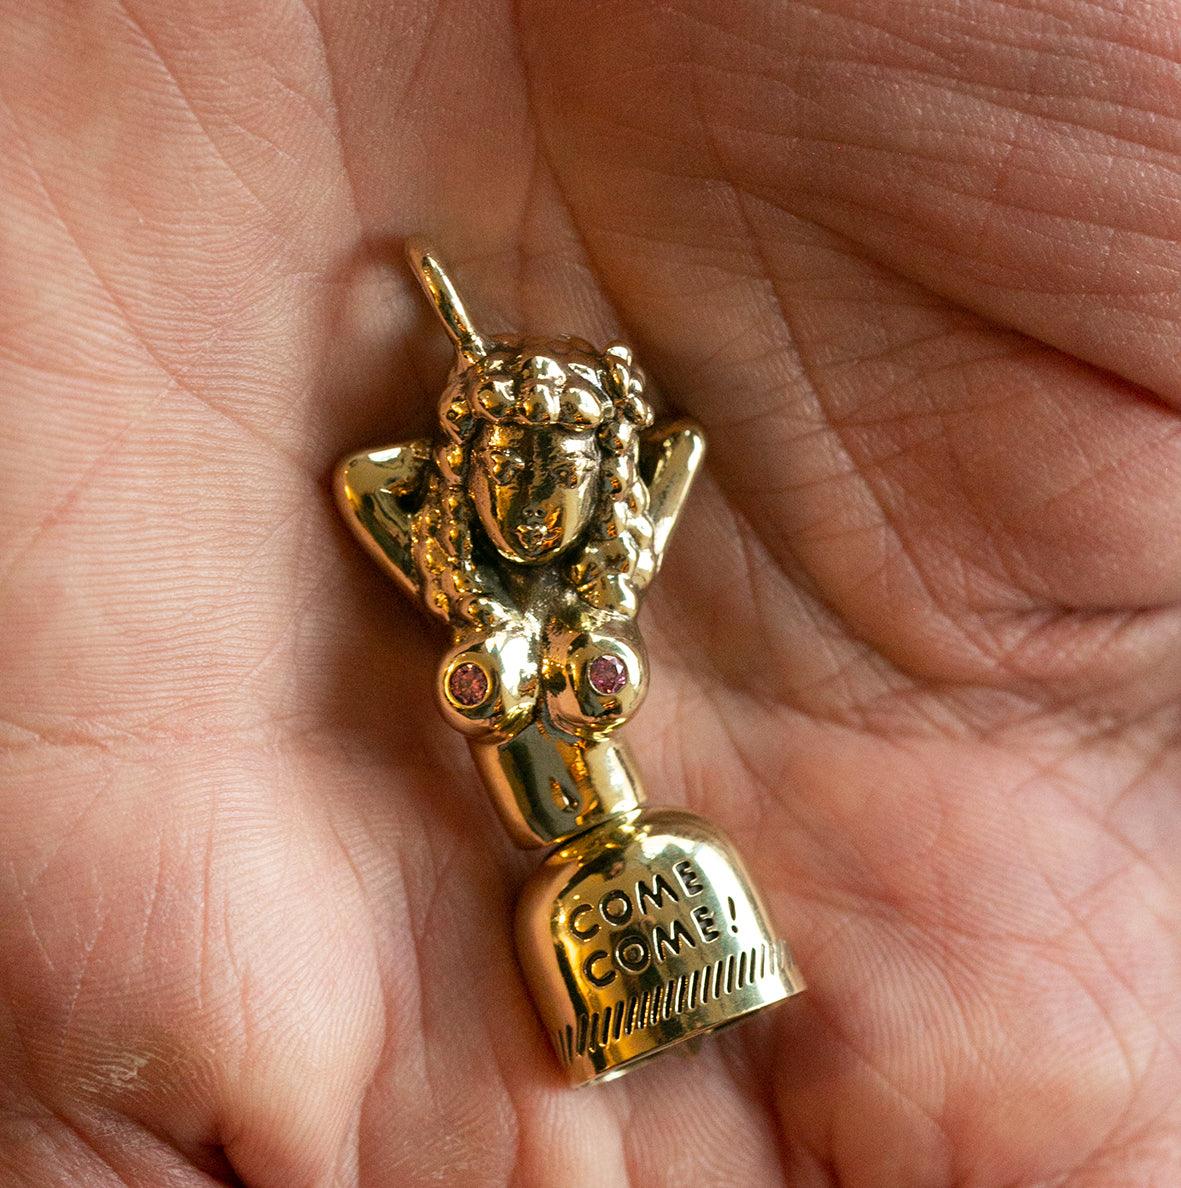 Image showing the Peanuts & Co COME COME BELL key ring pendant - Brass which is a Others described by the following info Accessories, Others, Peanuts & Co, Released and sold on the IRON HEART GERMANY online store